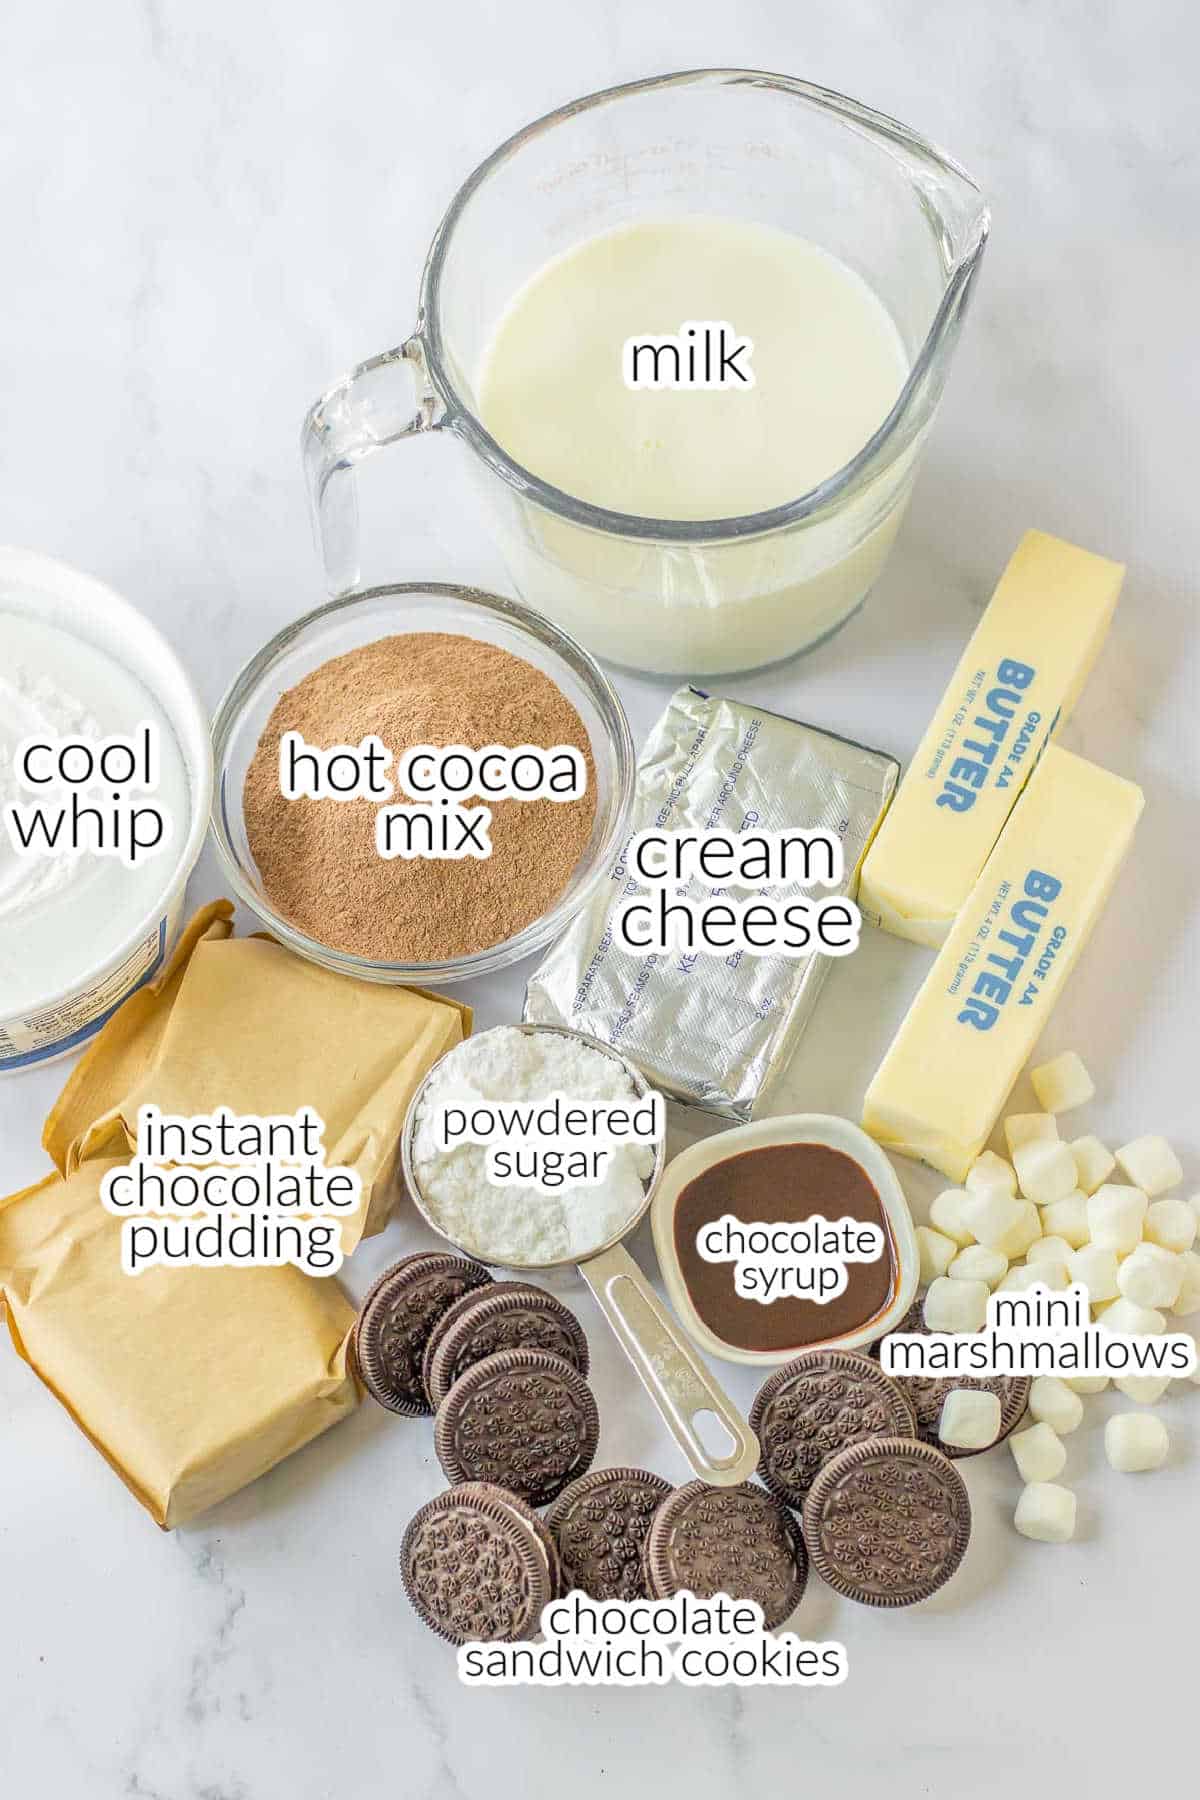 ingredients for chocolate oreo delight - cool whip, hot cocoa mix, milk, pudding powdered sugar, oreos and cream cheese, and butter.